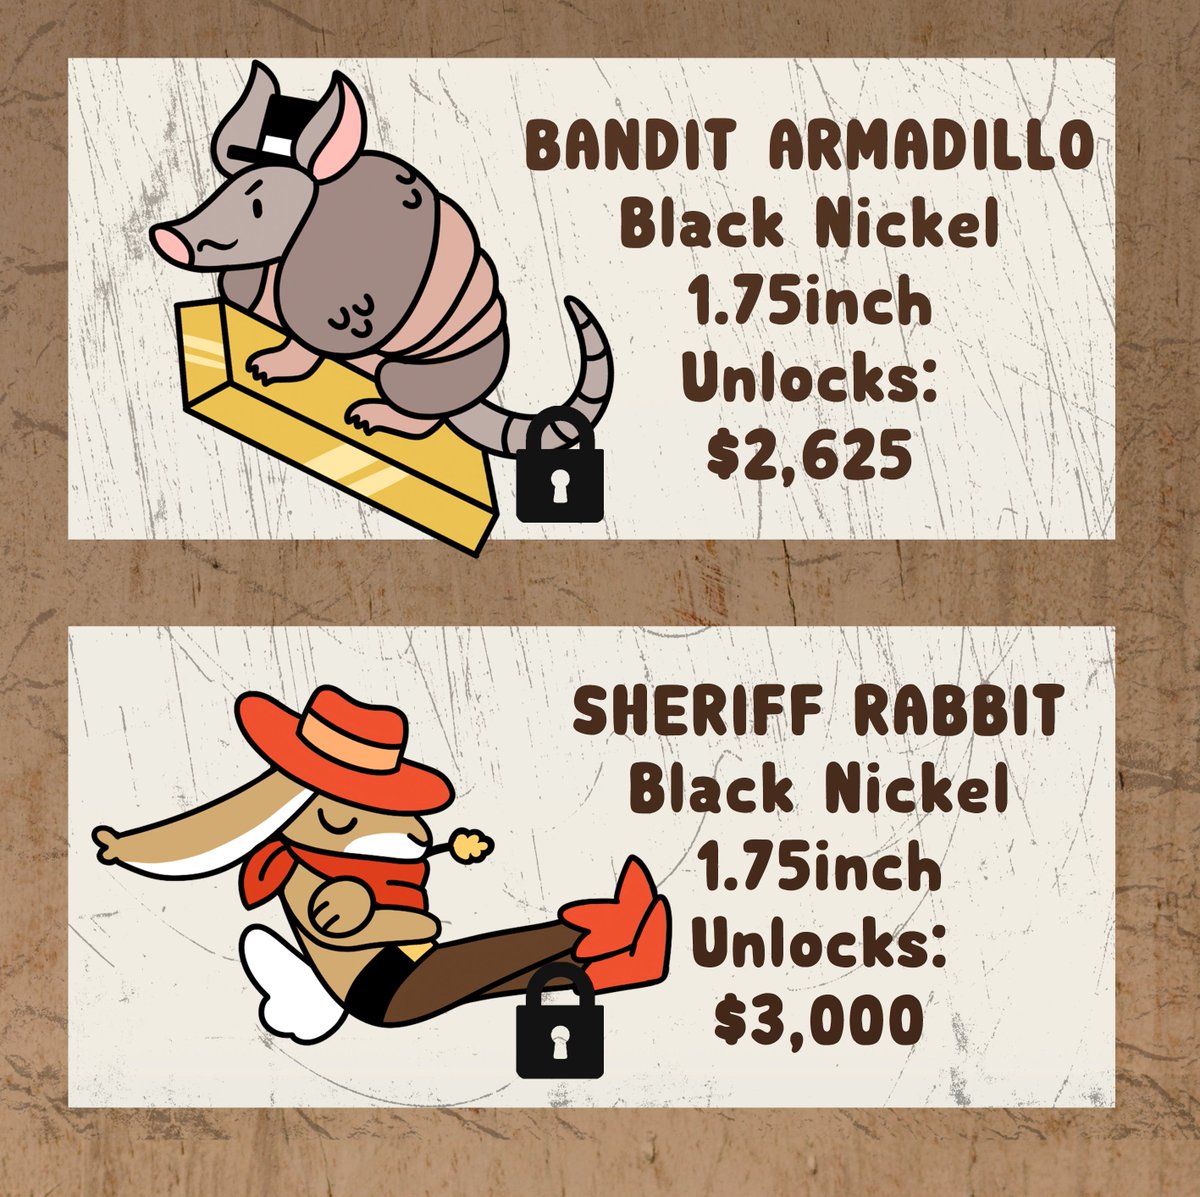 All stretch goals are unlocked!!! Here are the next set ? there are 12 days left and I just know we can do it 

https://t.co/YWPDtKj1q4 #kickstarter #yeehaw 